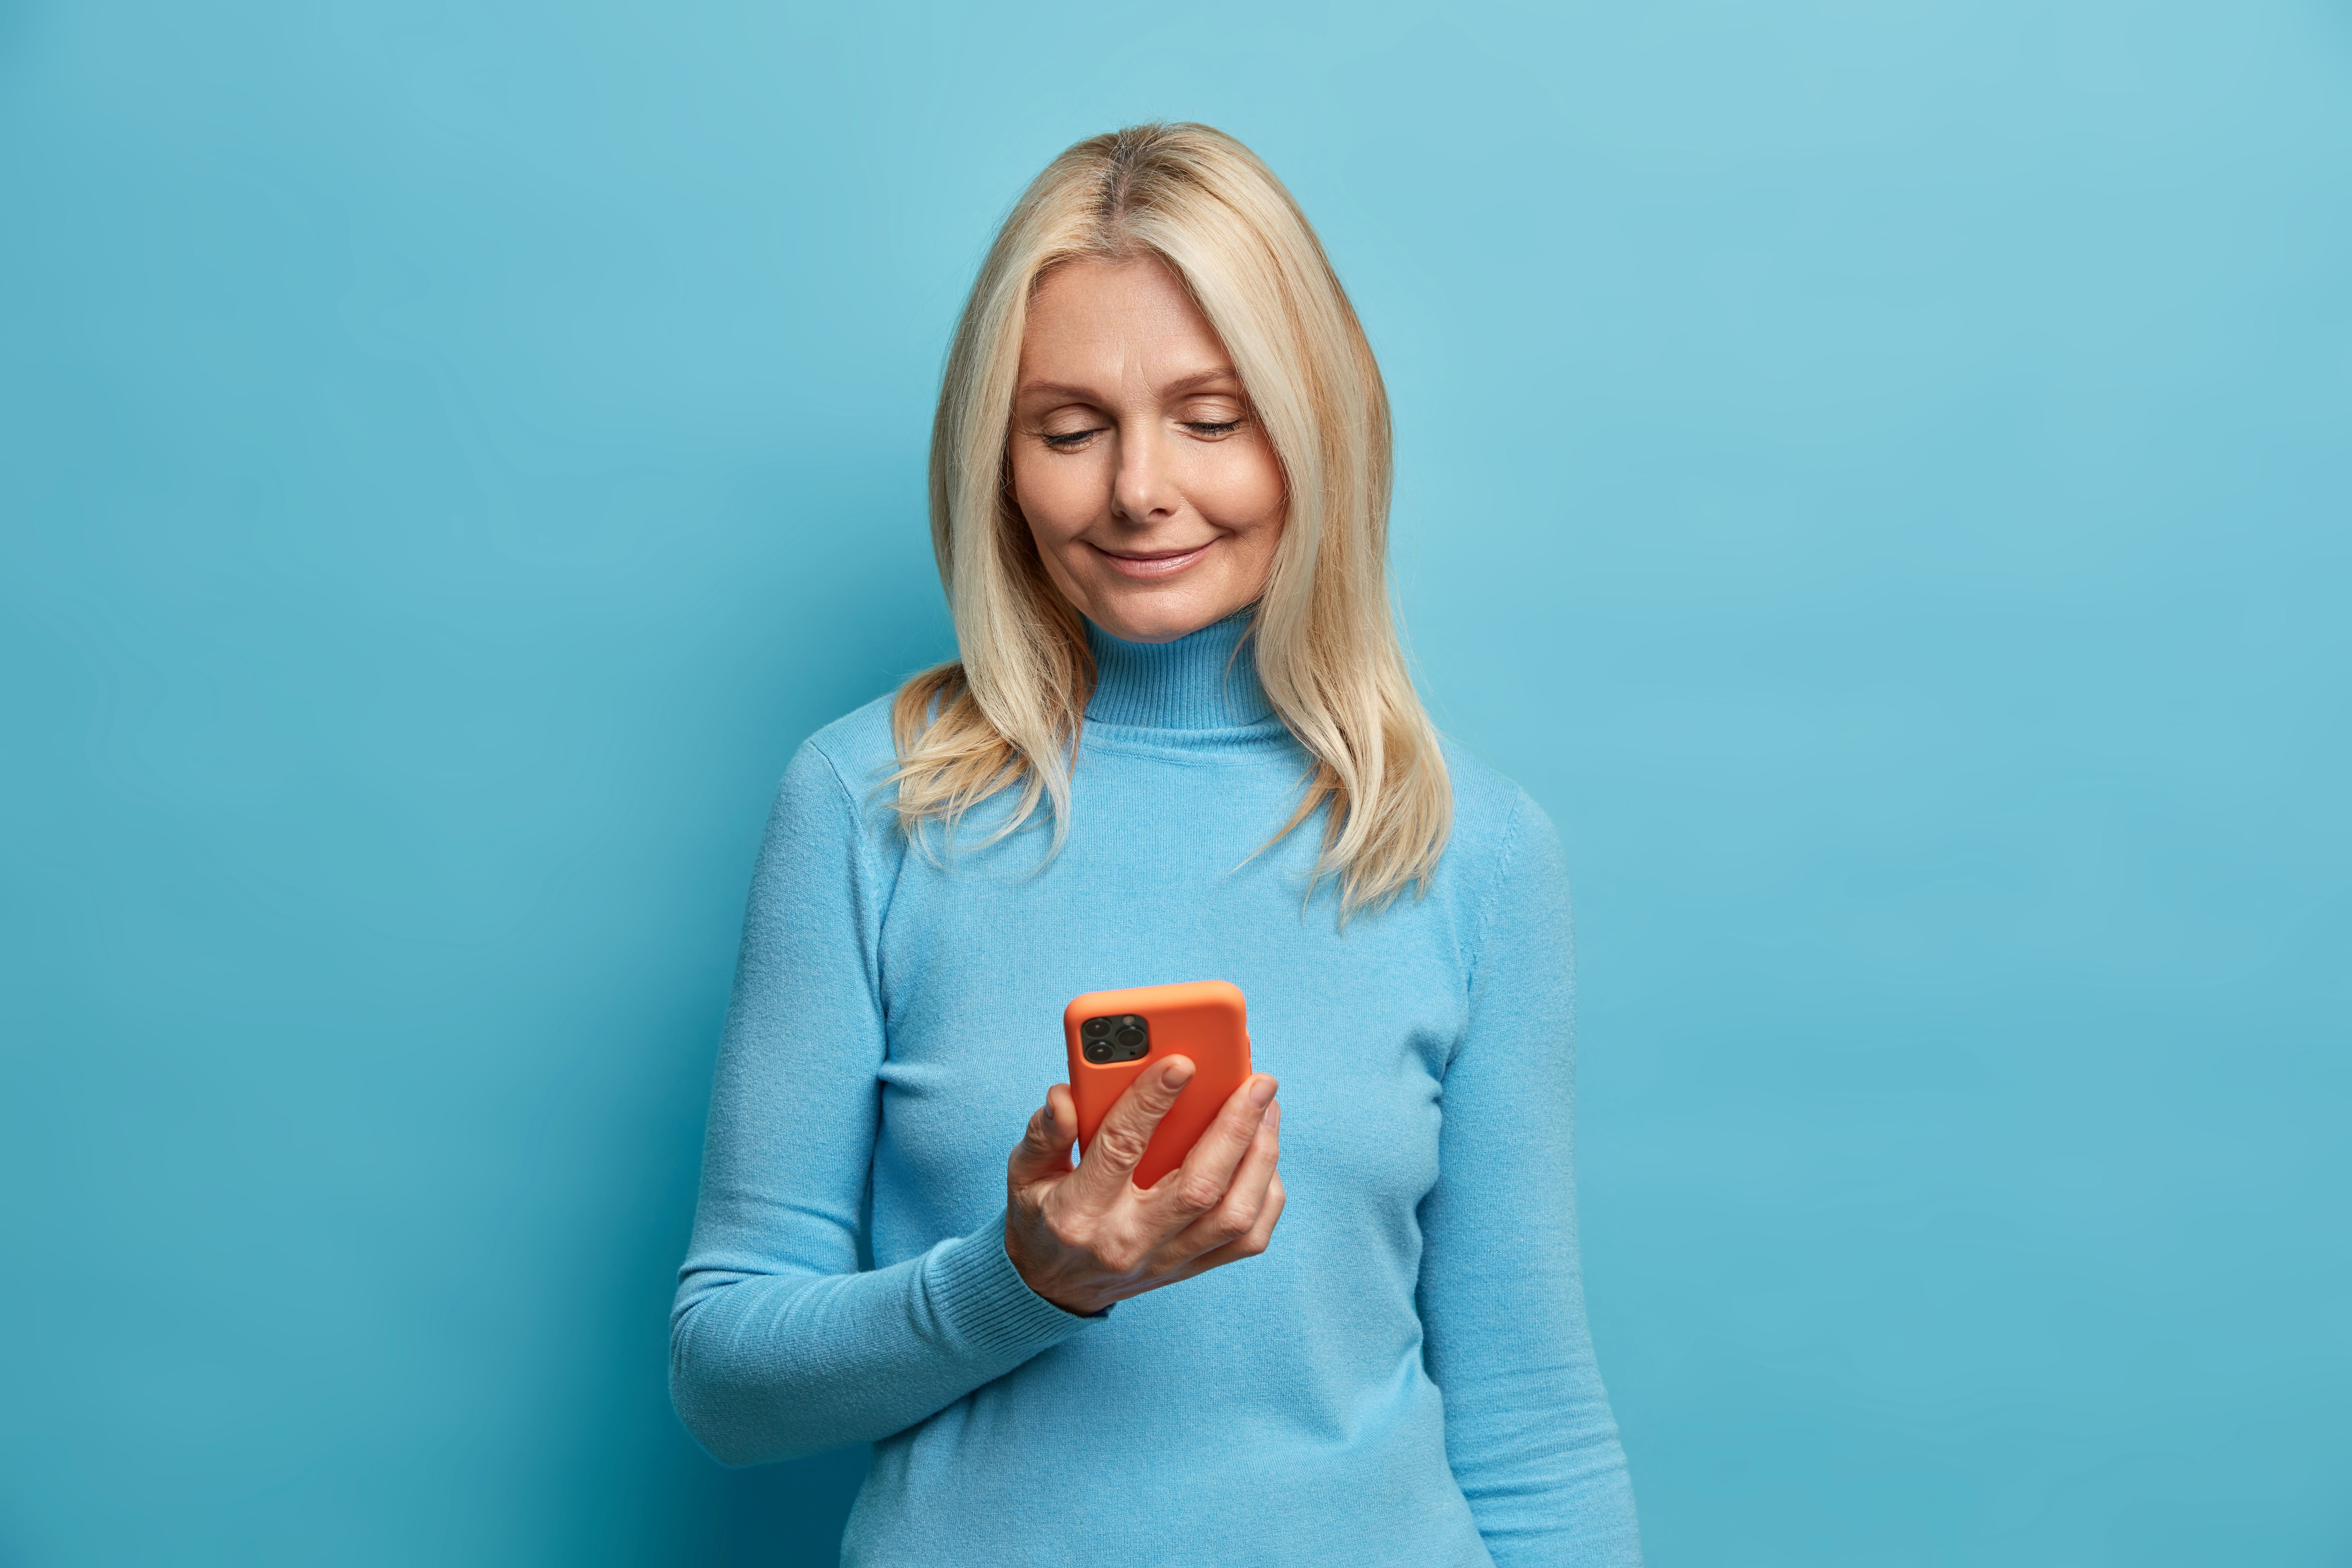 Woman with blonde hair smiles looking down at her phone